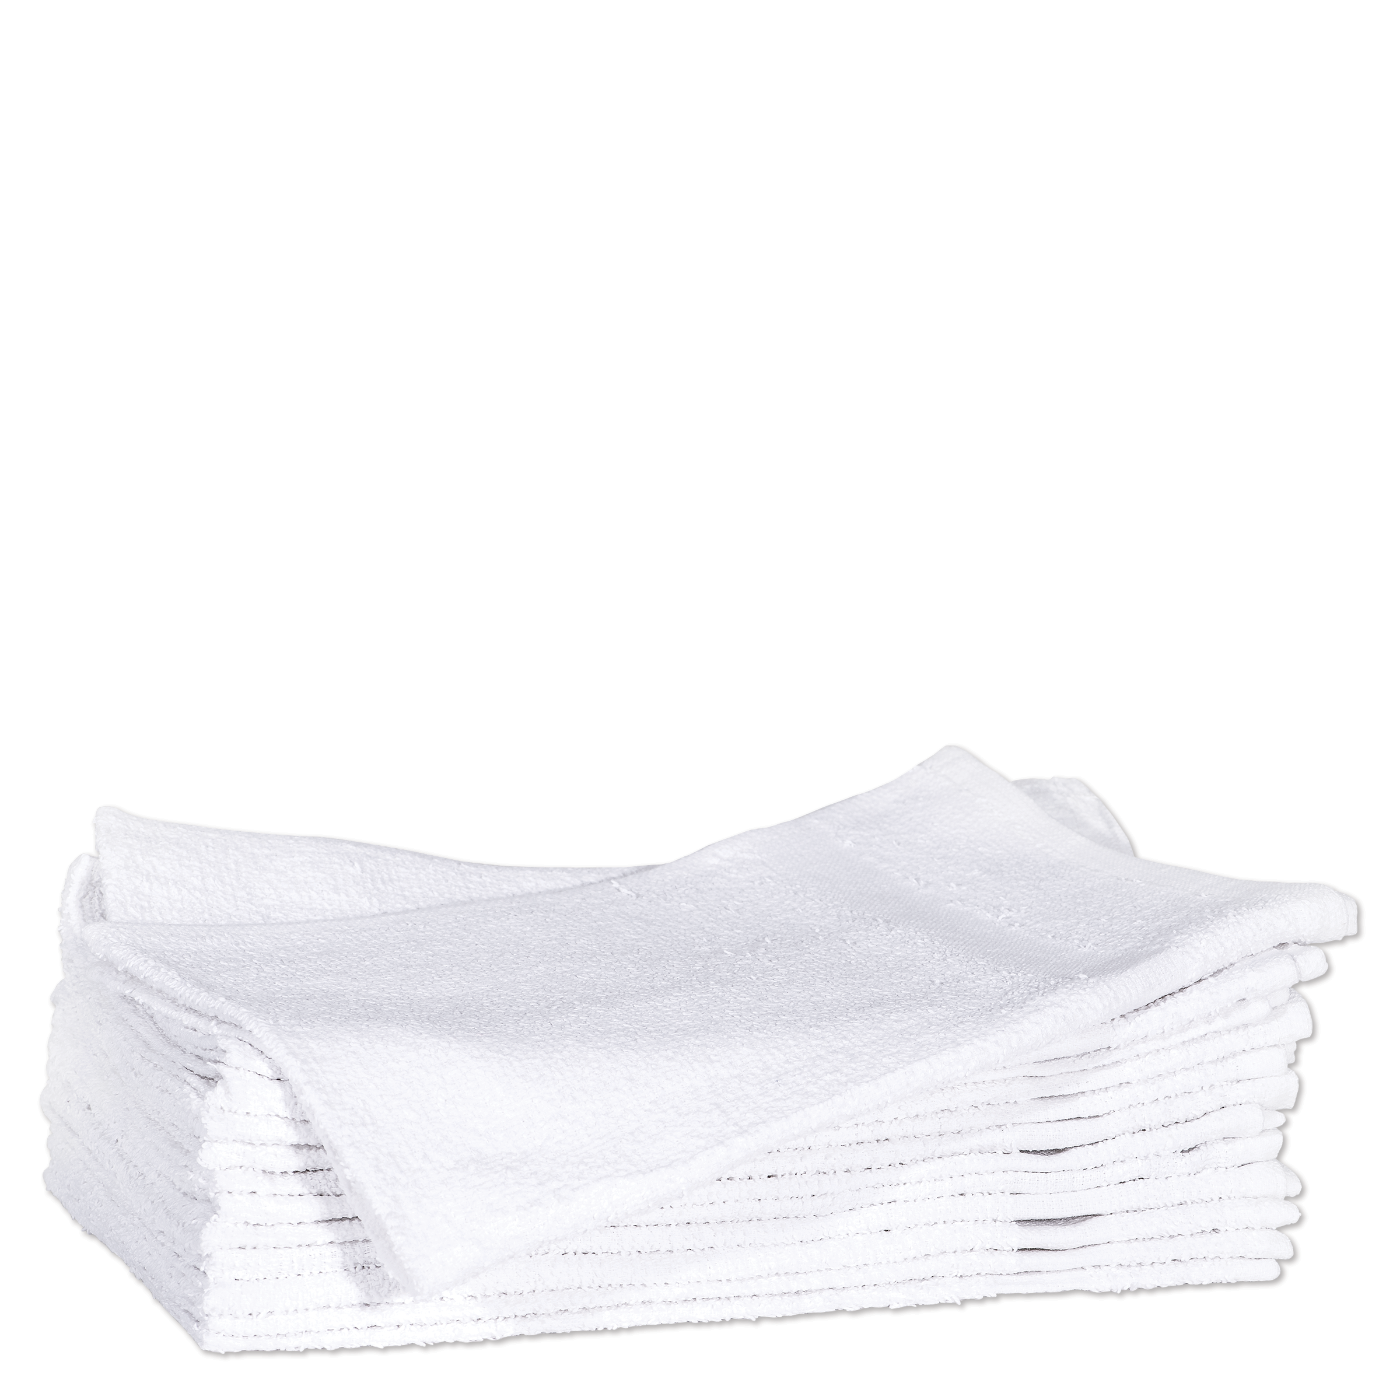 Cotton Towels, 15" x 25", 2-1/4 lbs. - White